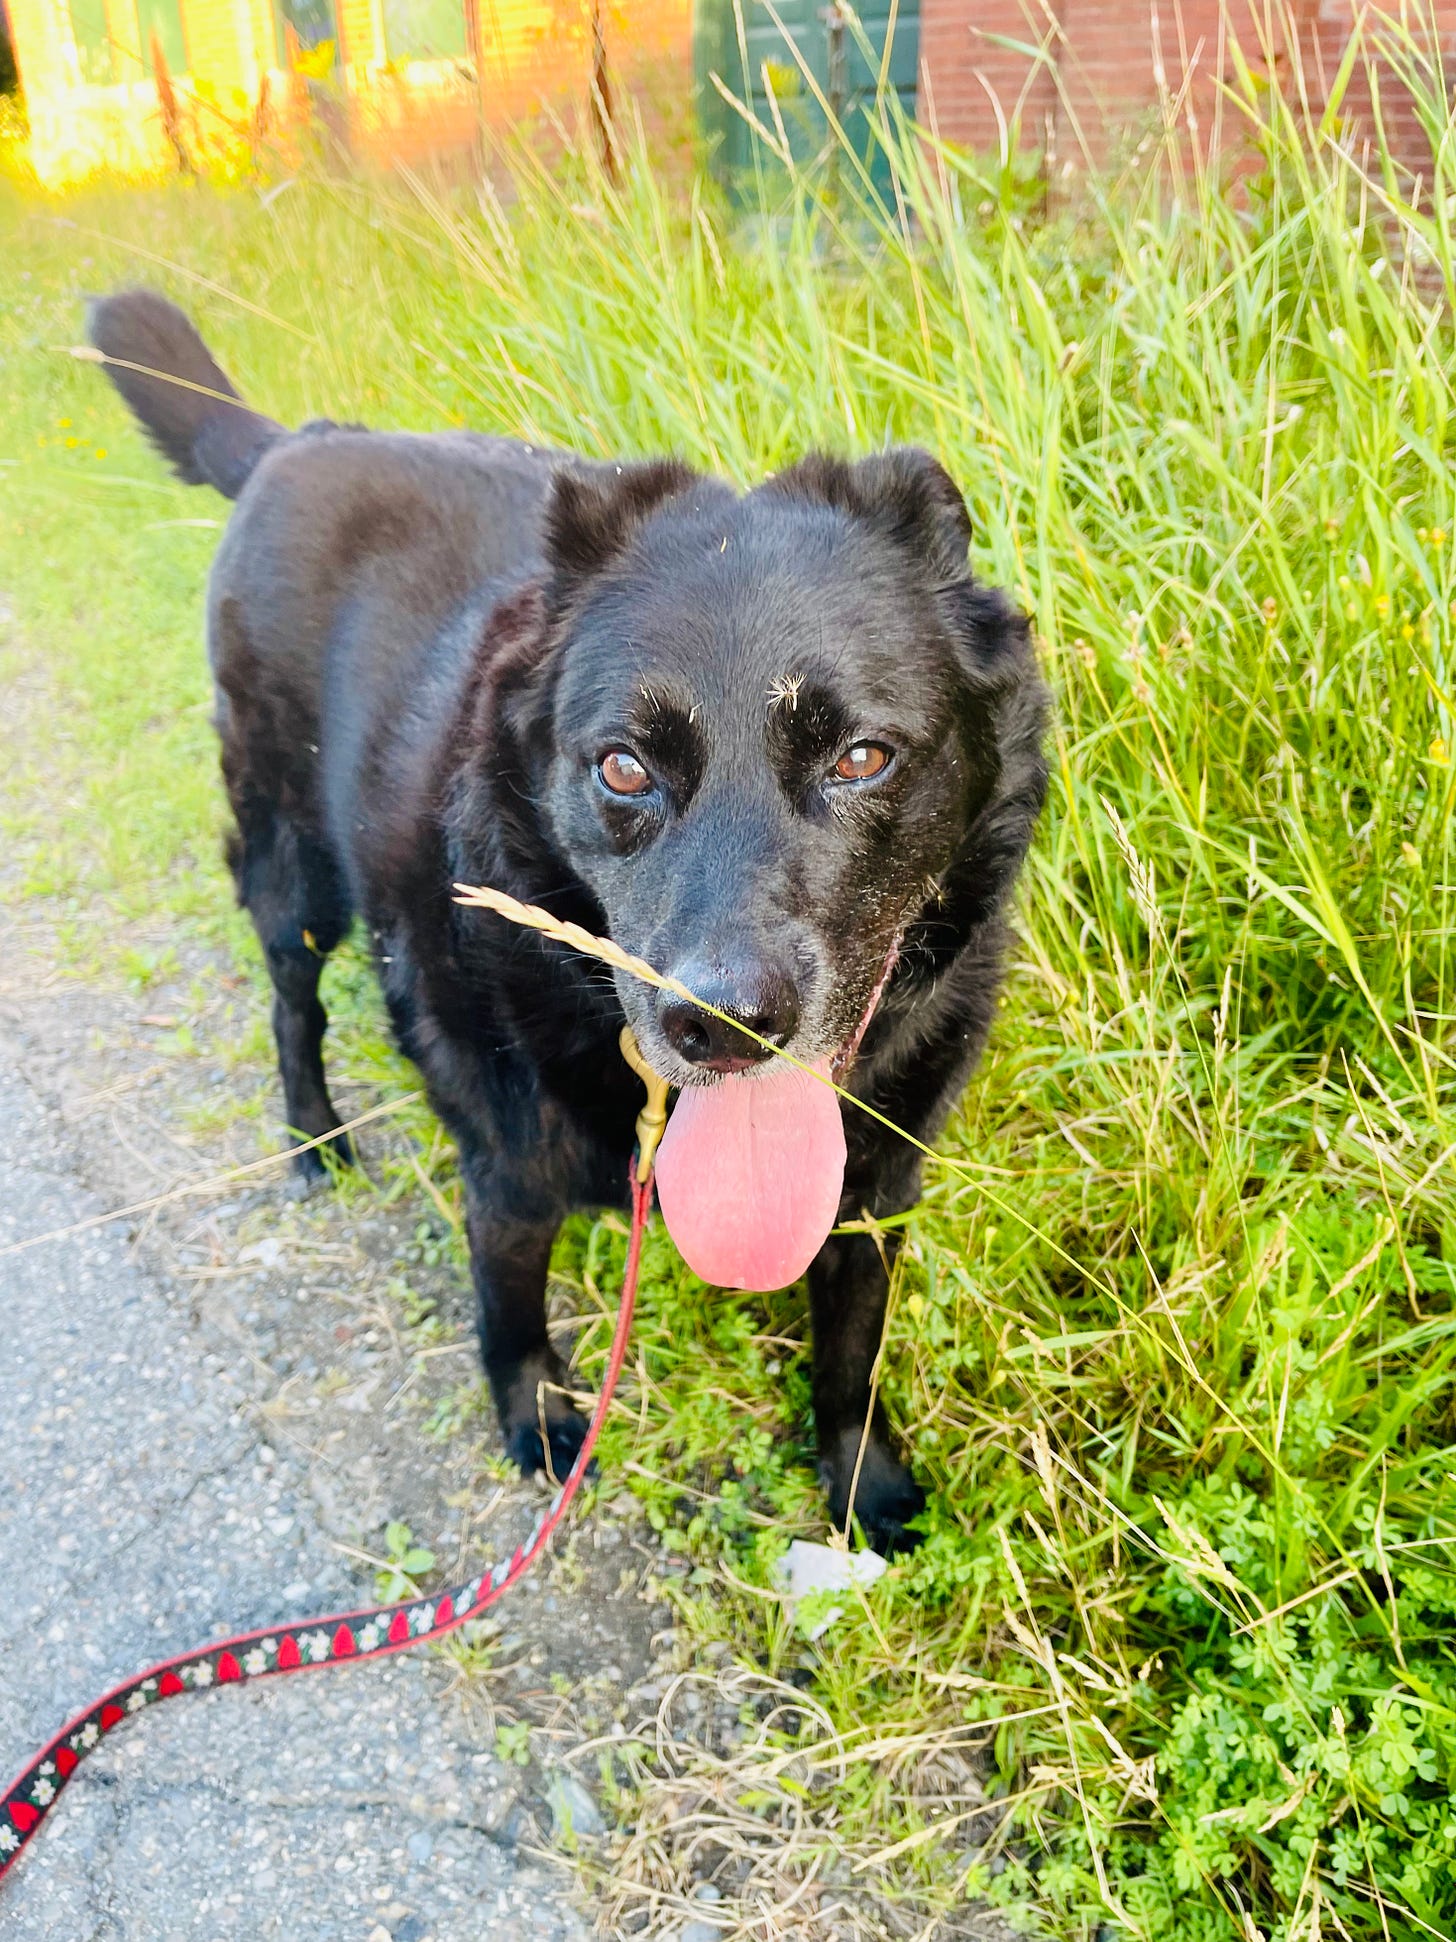 very old dog in long grass with stuff on his face